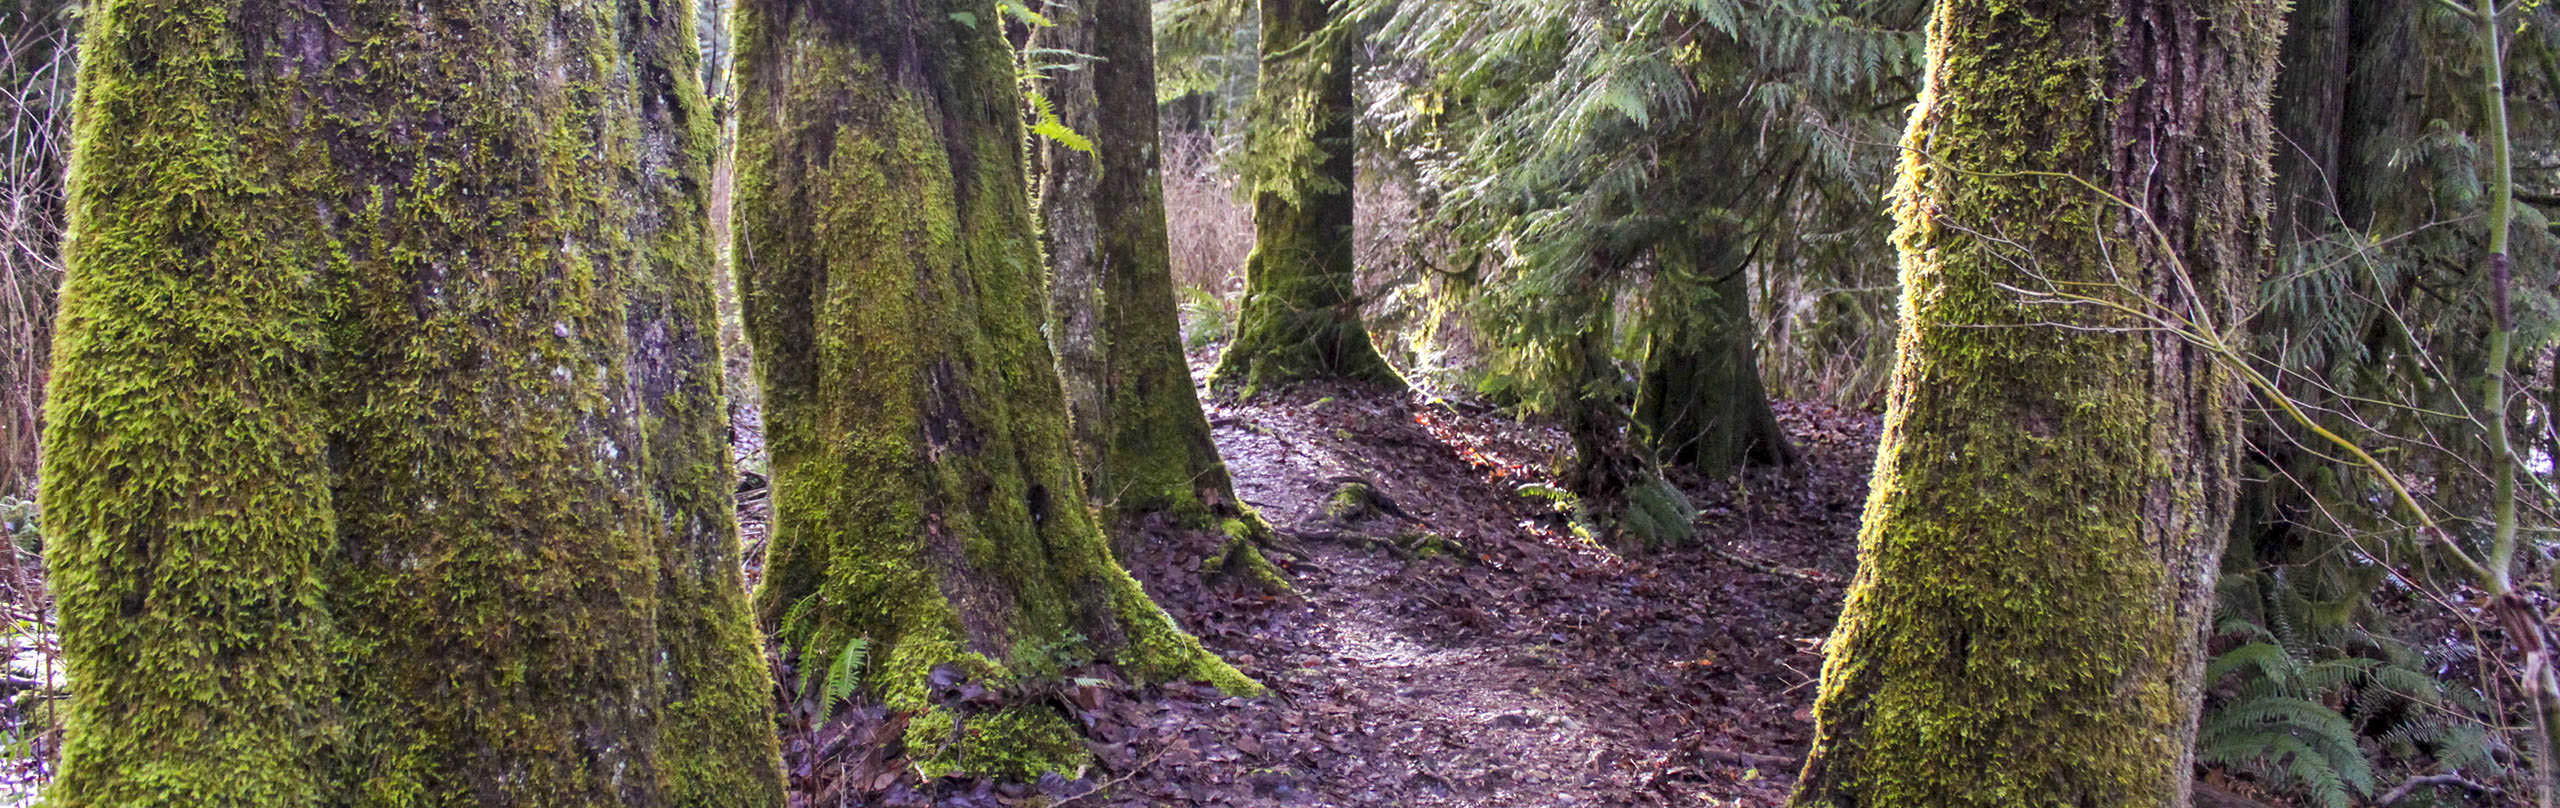 A forested trail along the Coquitlam River